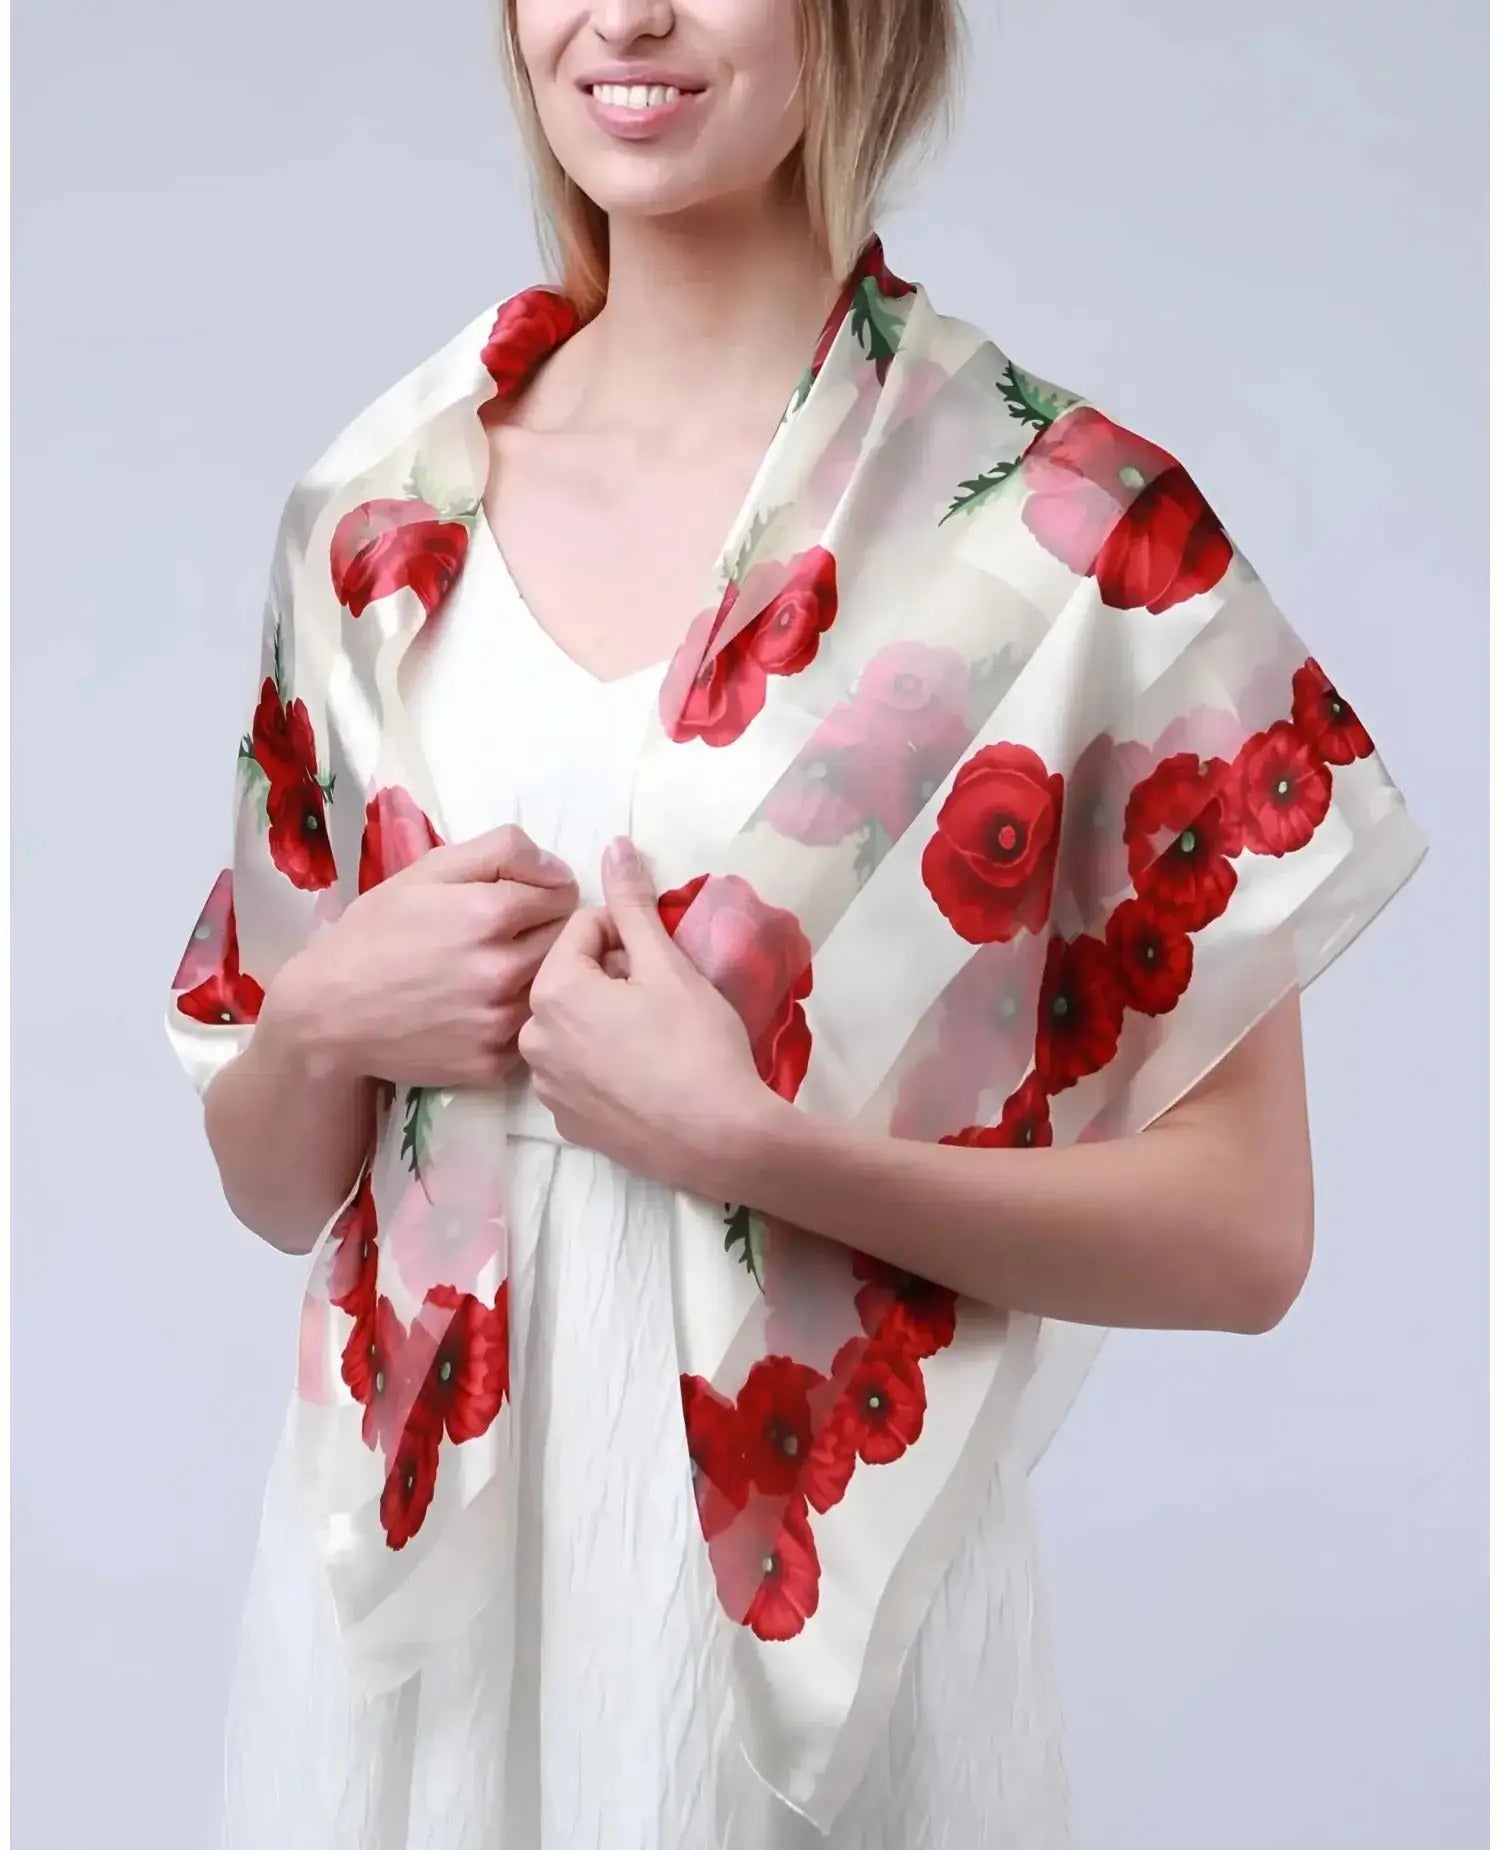 Woman wearing a white dress with red poppy print, showcasing Poppy Square Scarf & Holder Set for Remembrance Day